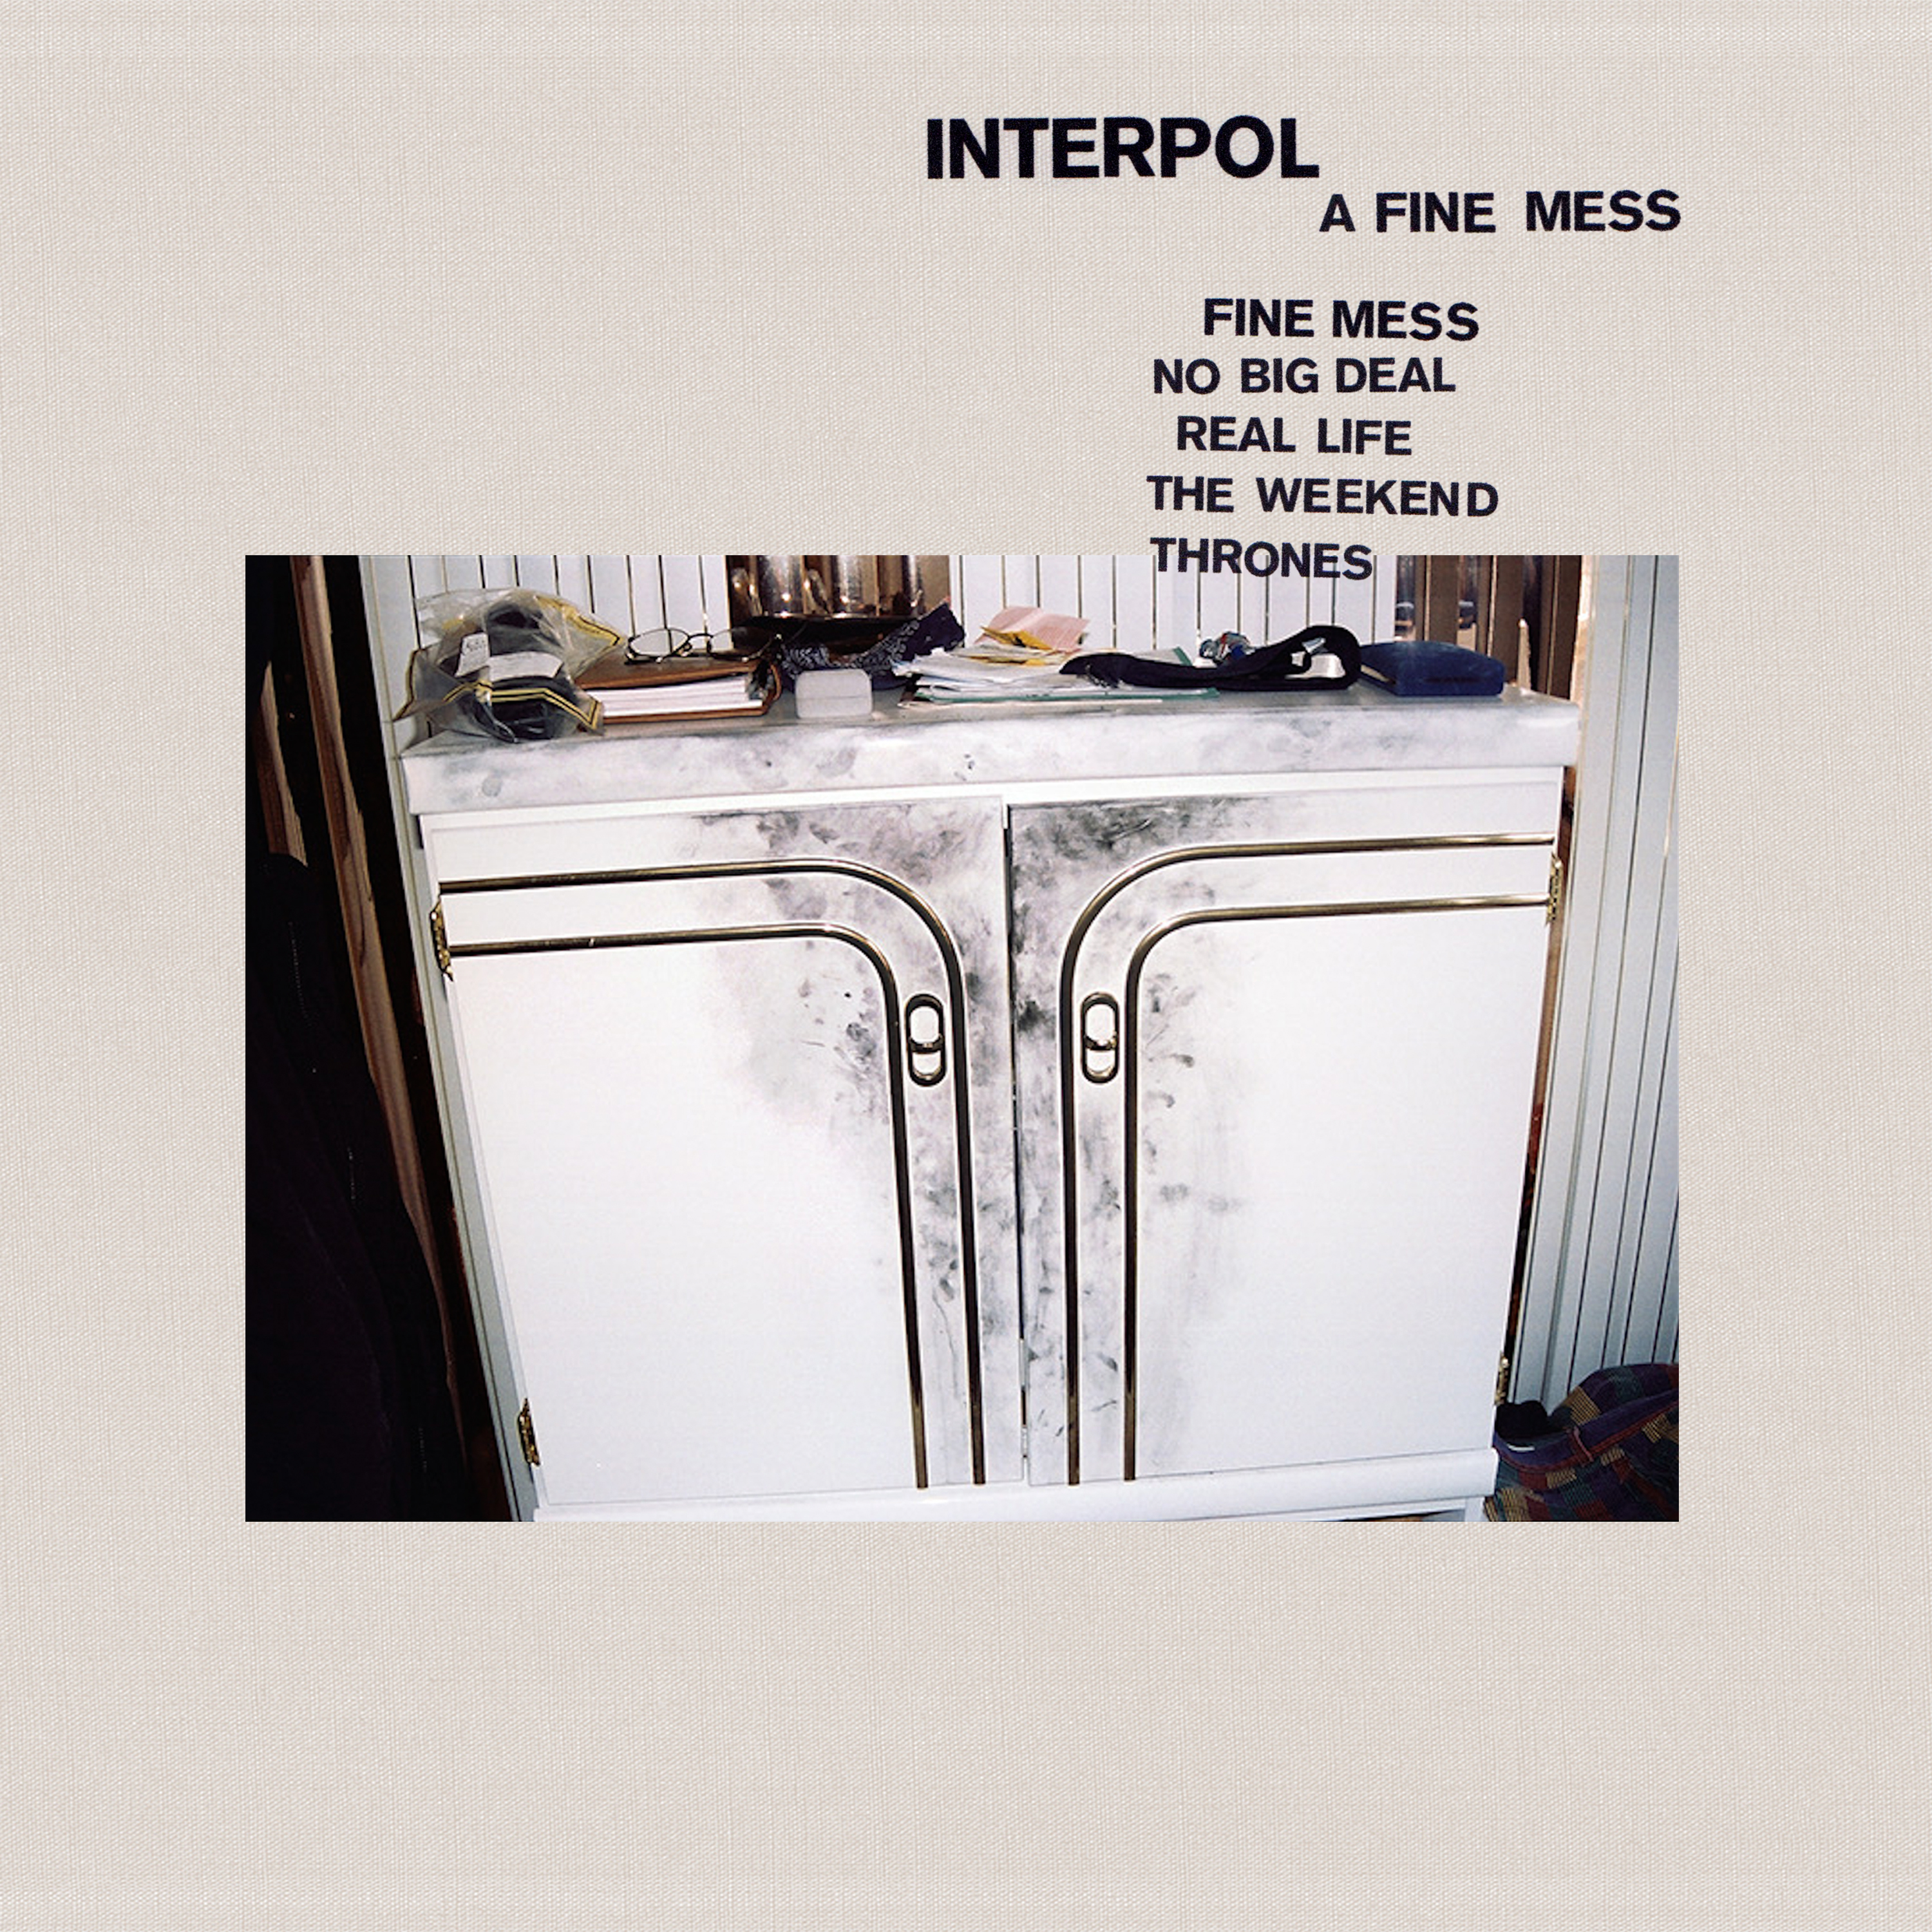 Interpol have announced their new EP A Fine Mess